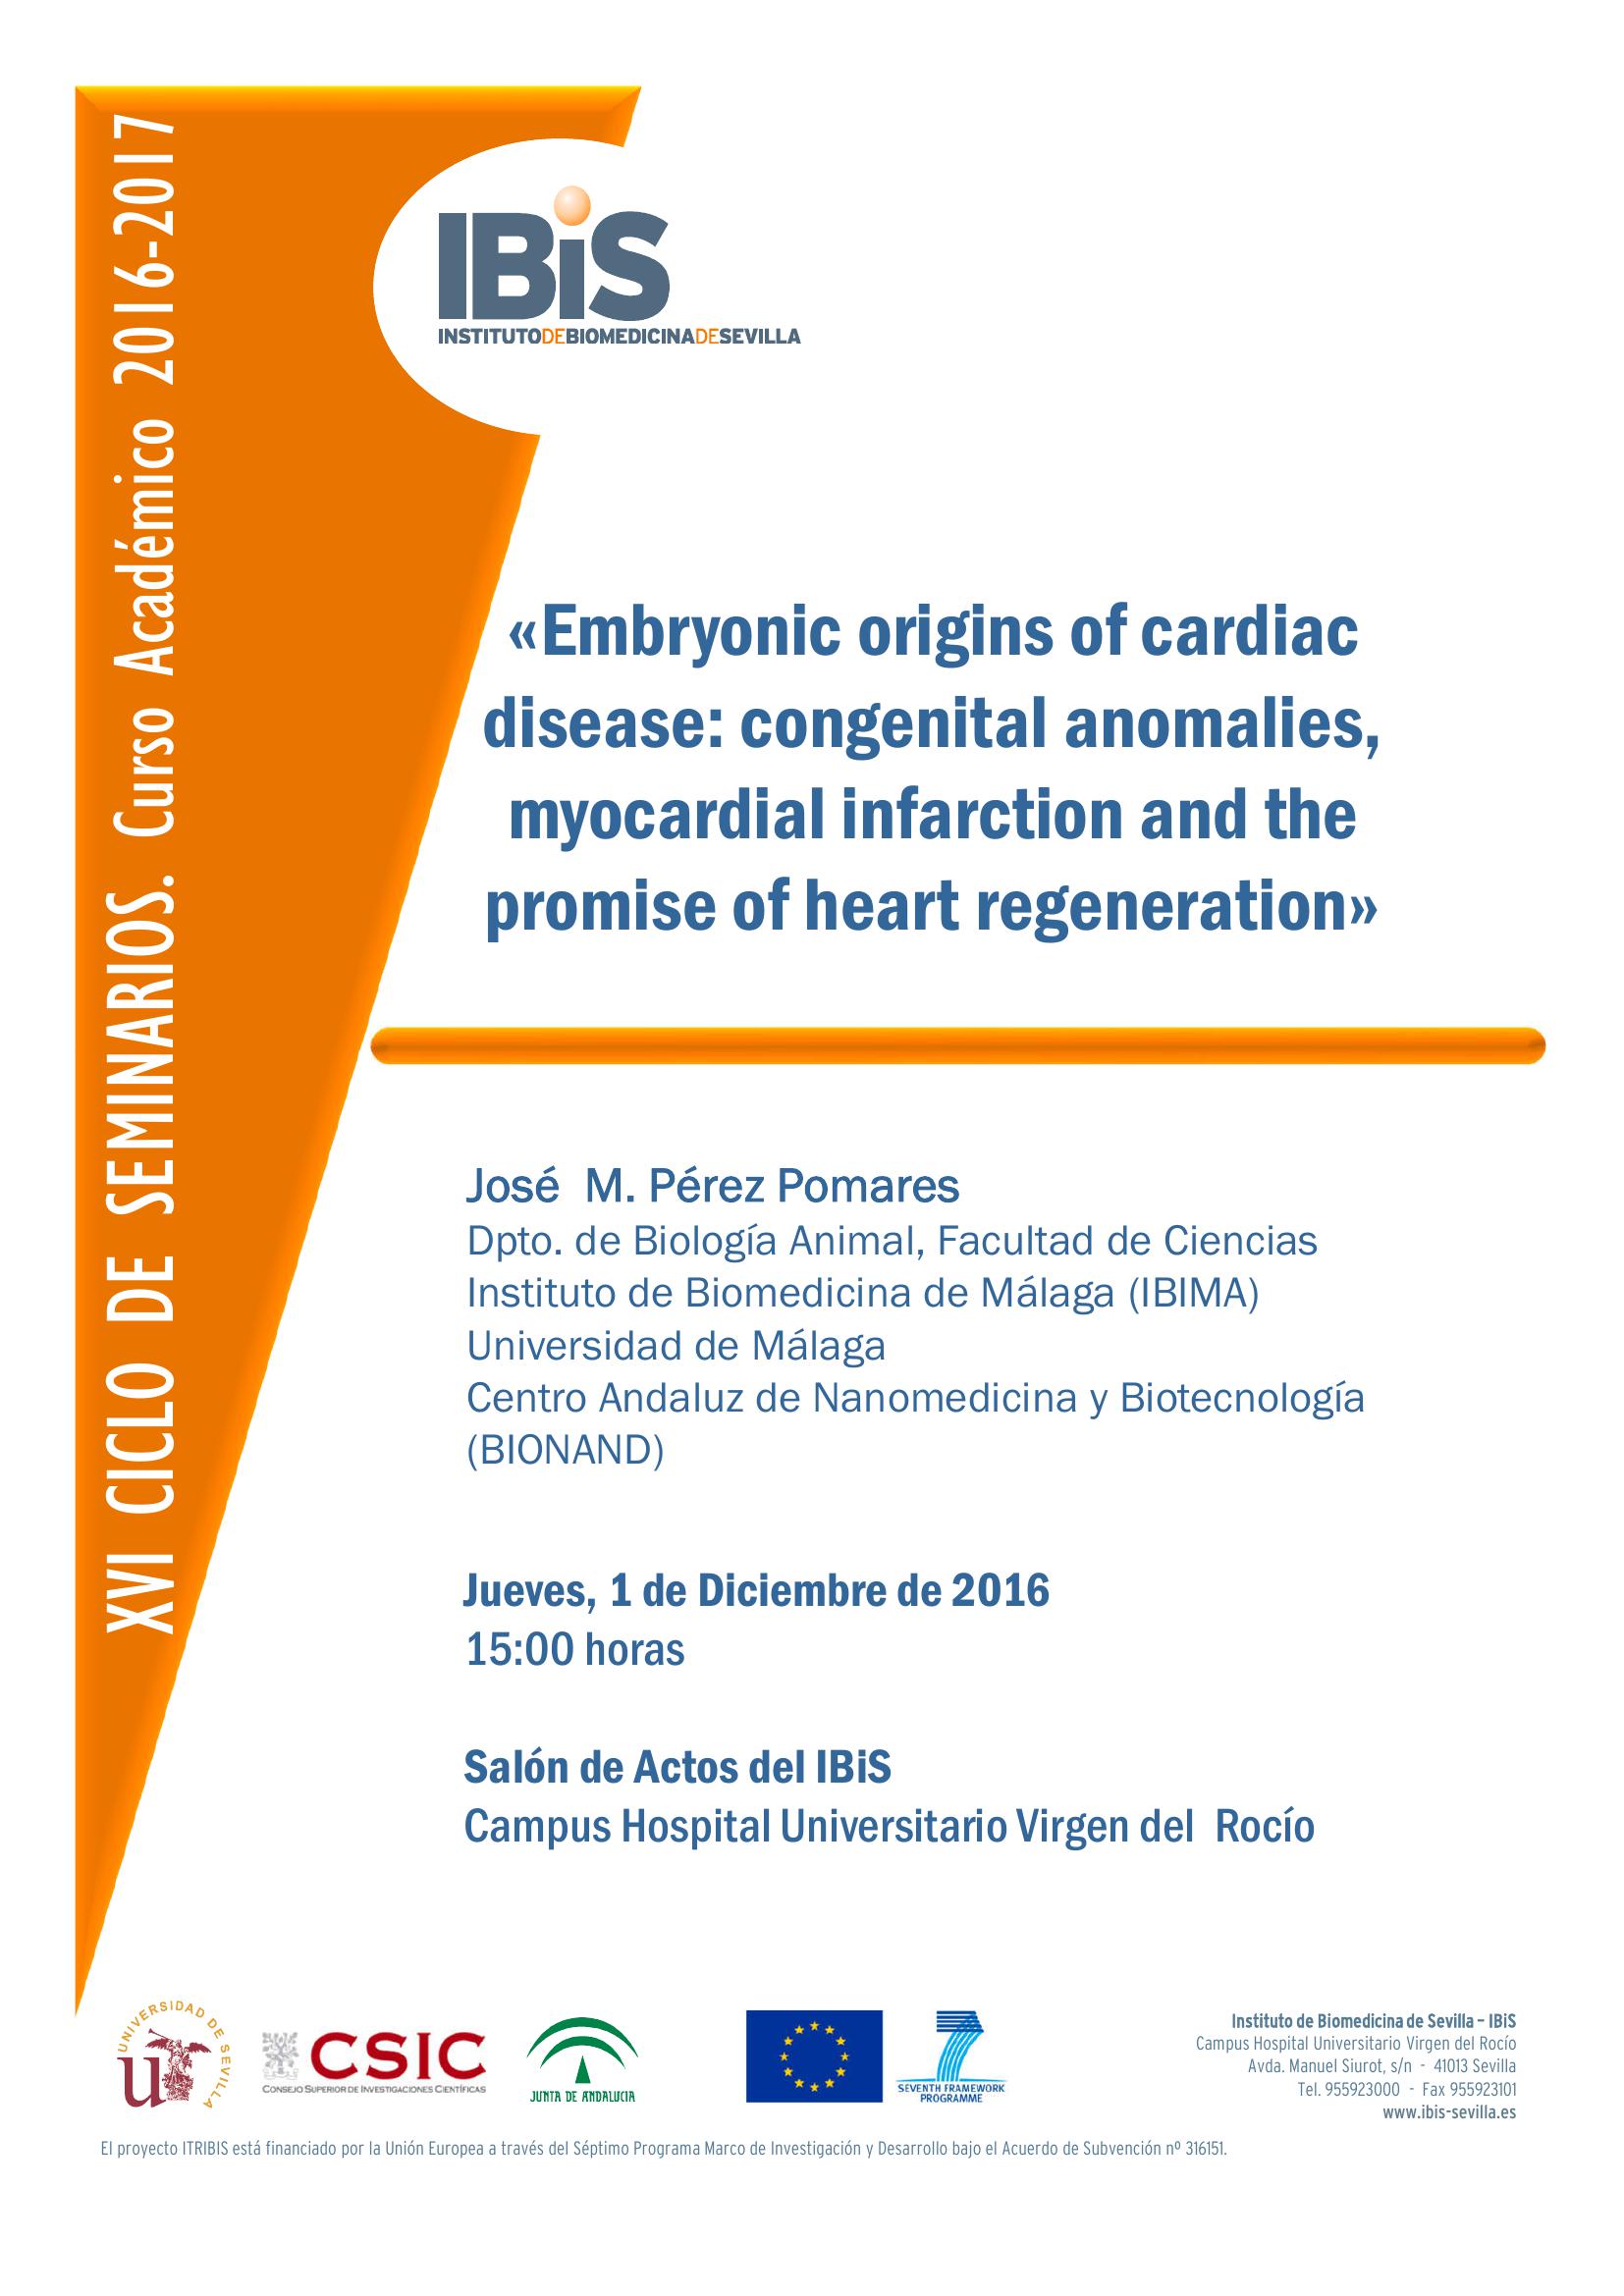 Poster: Embryonic origins of cardiac disease: congenital anomalies, myocardial infarction and the promise of heart regeneration